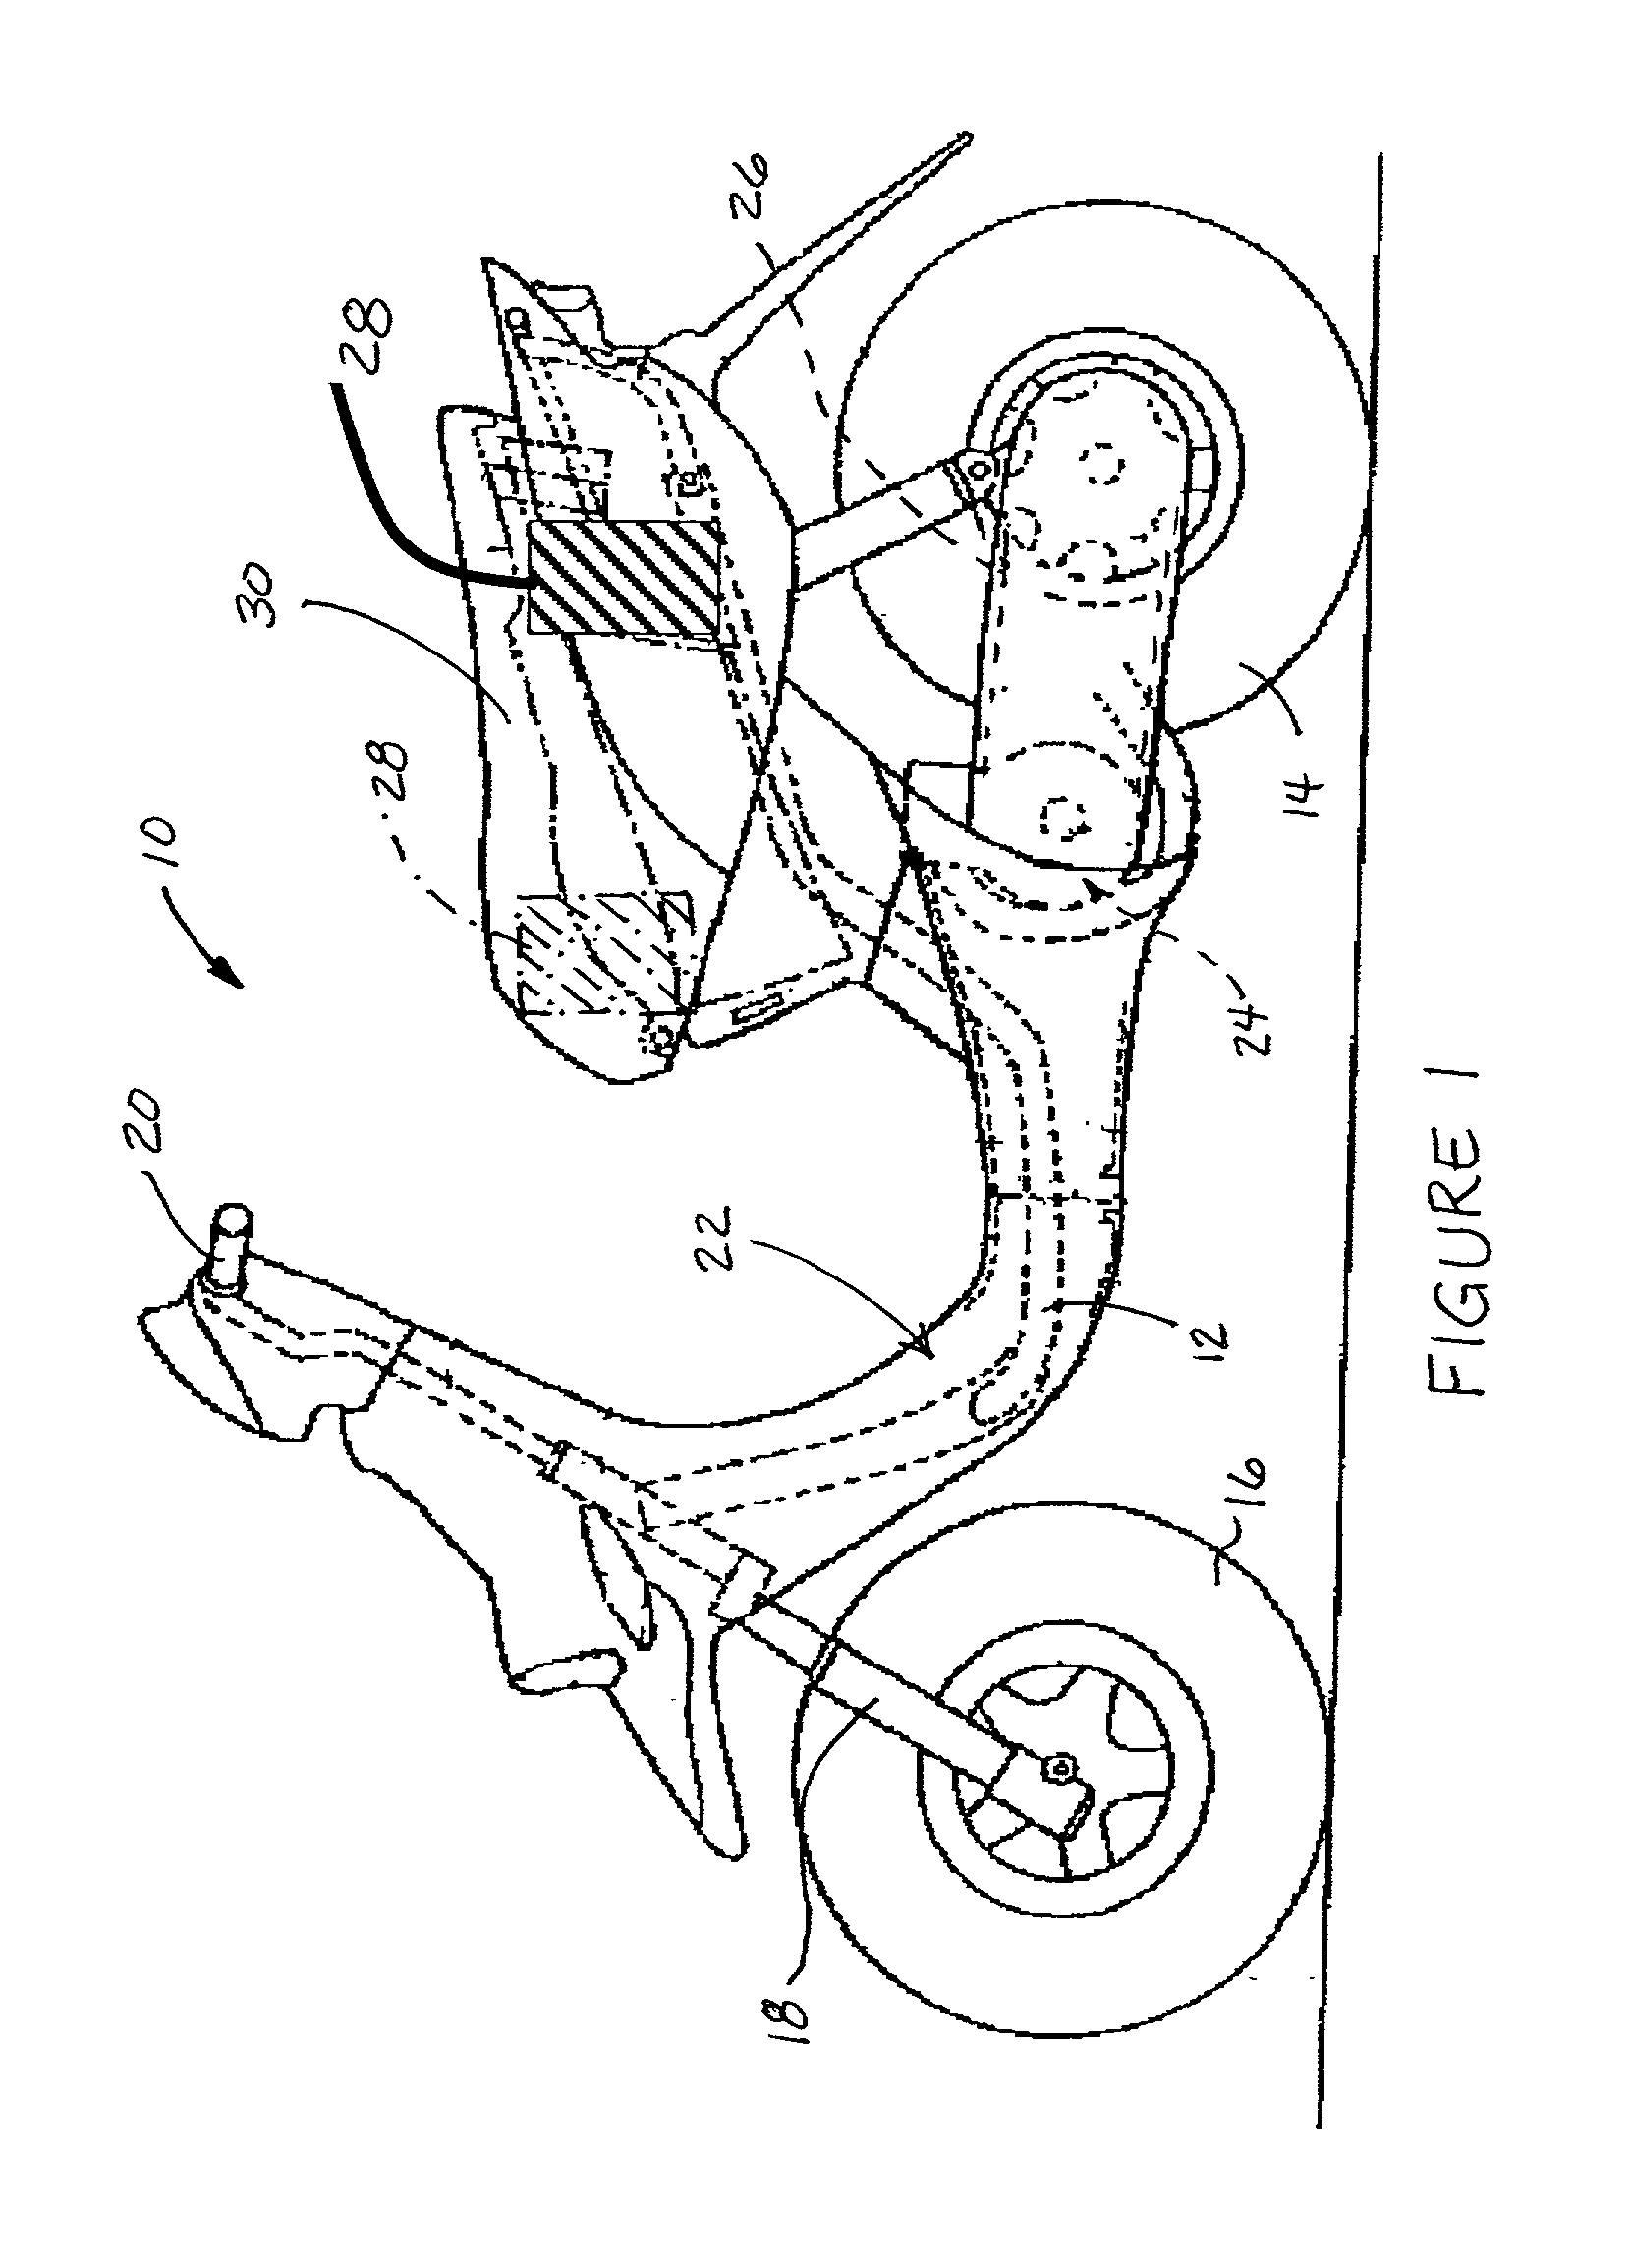 Acceleration sensor and engine control for motorcycle